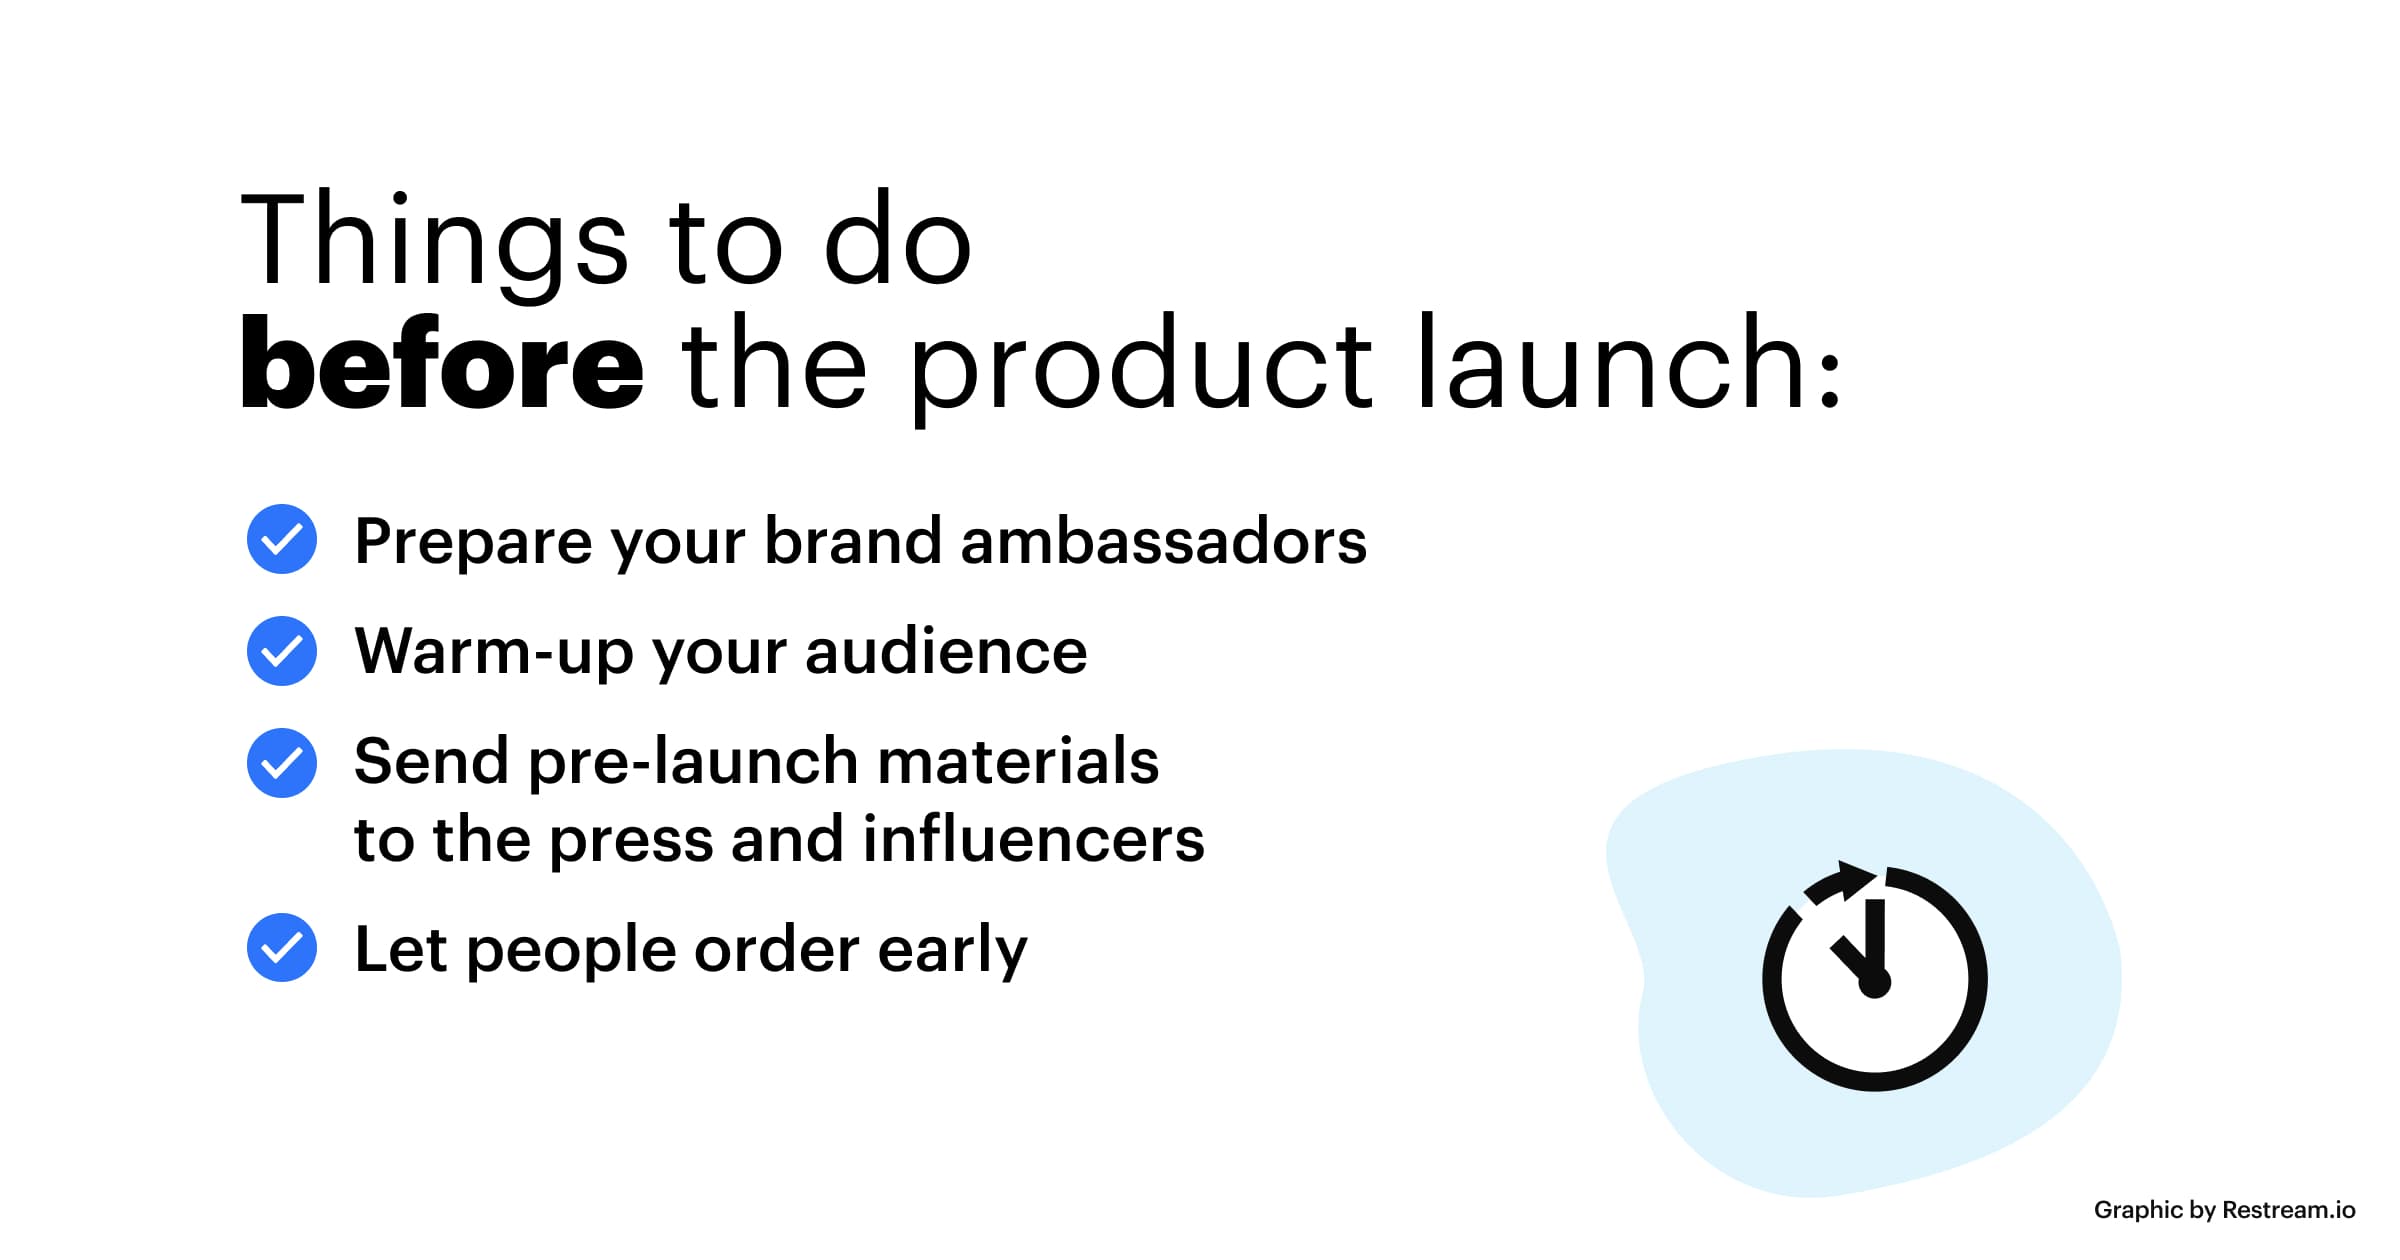 Things to do before the product launch